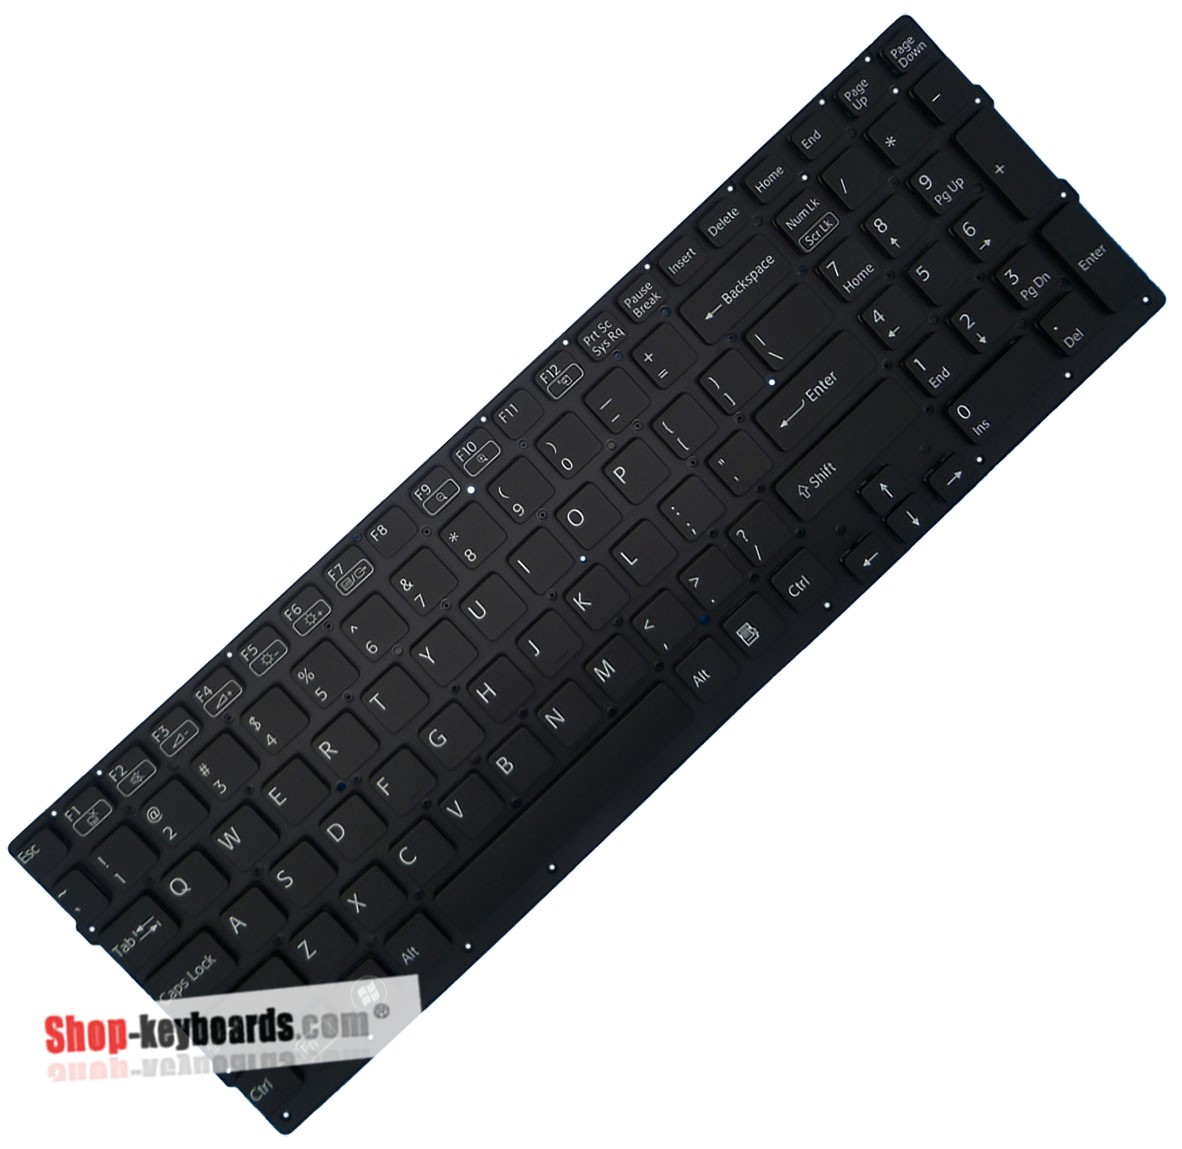 Sony 55010S301U1-035-G Keyboard replacement